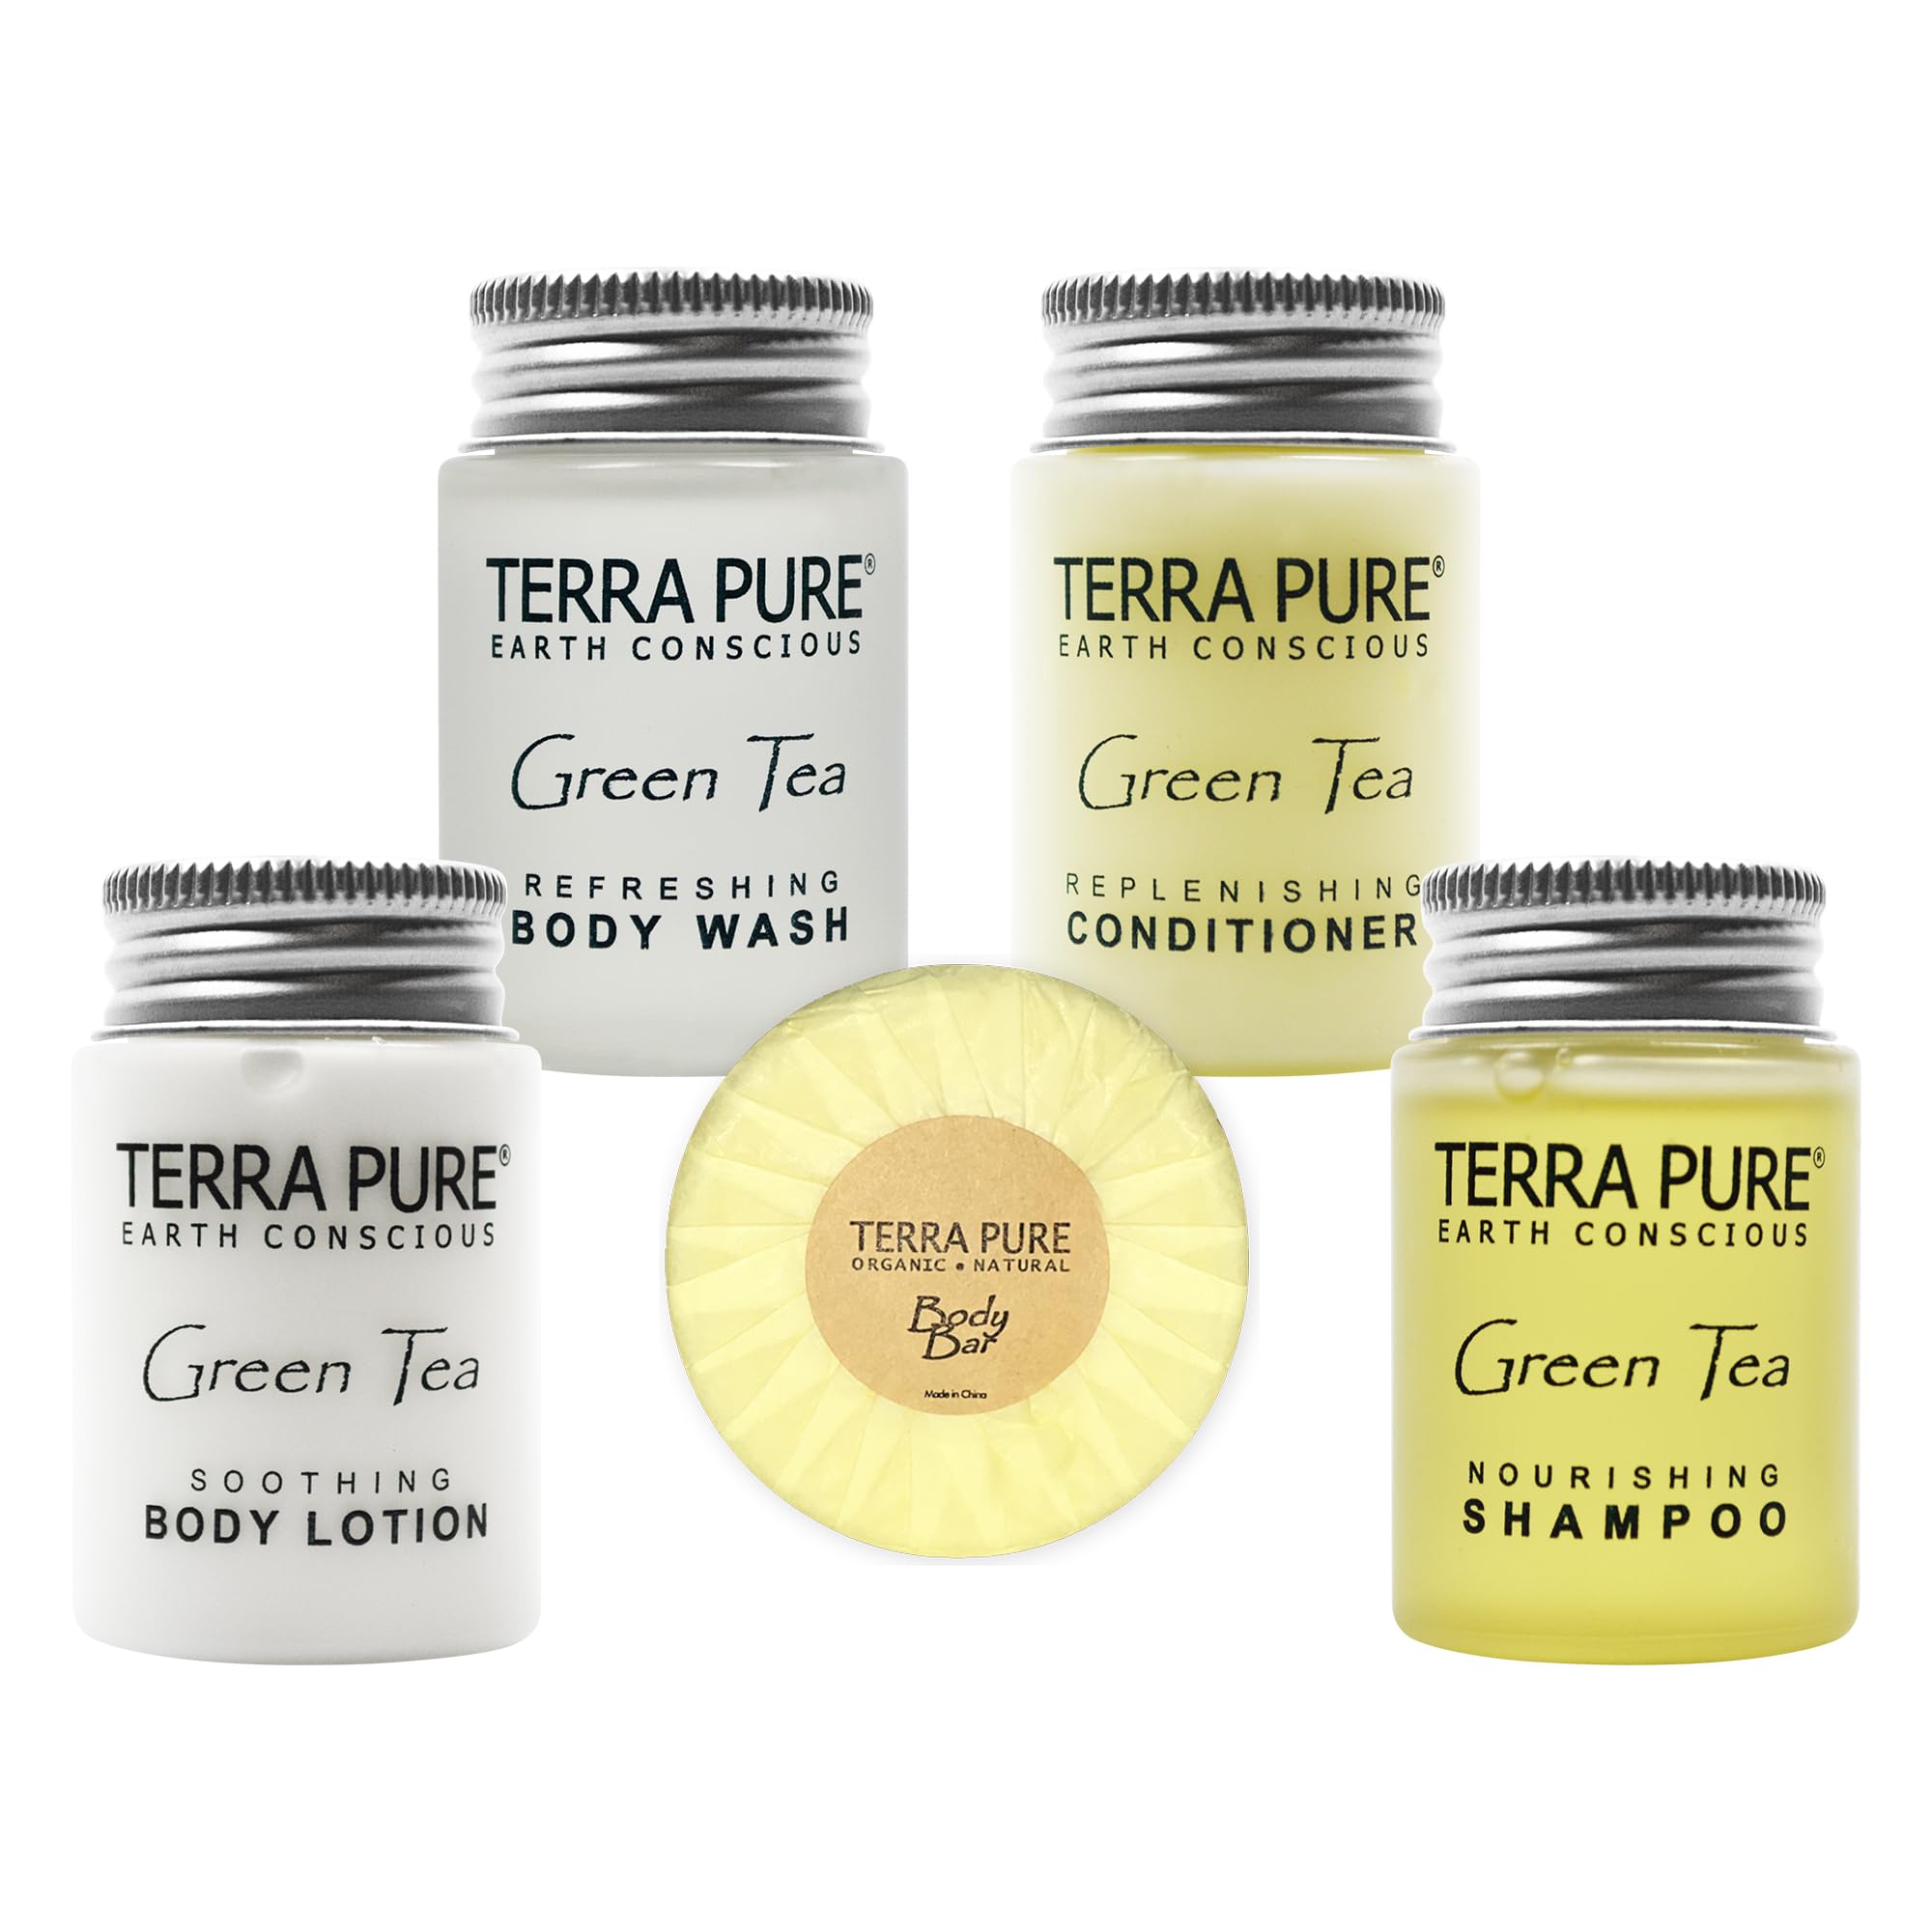 Terra Pure Hotel Soaps and Toiletries Bulk Set 1-Shoppe All-In-Kit Amenities for Hotels 1oz Hotel Shampoo & conditioner, Body Wa